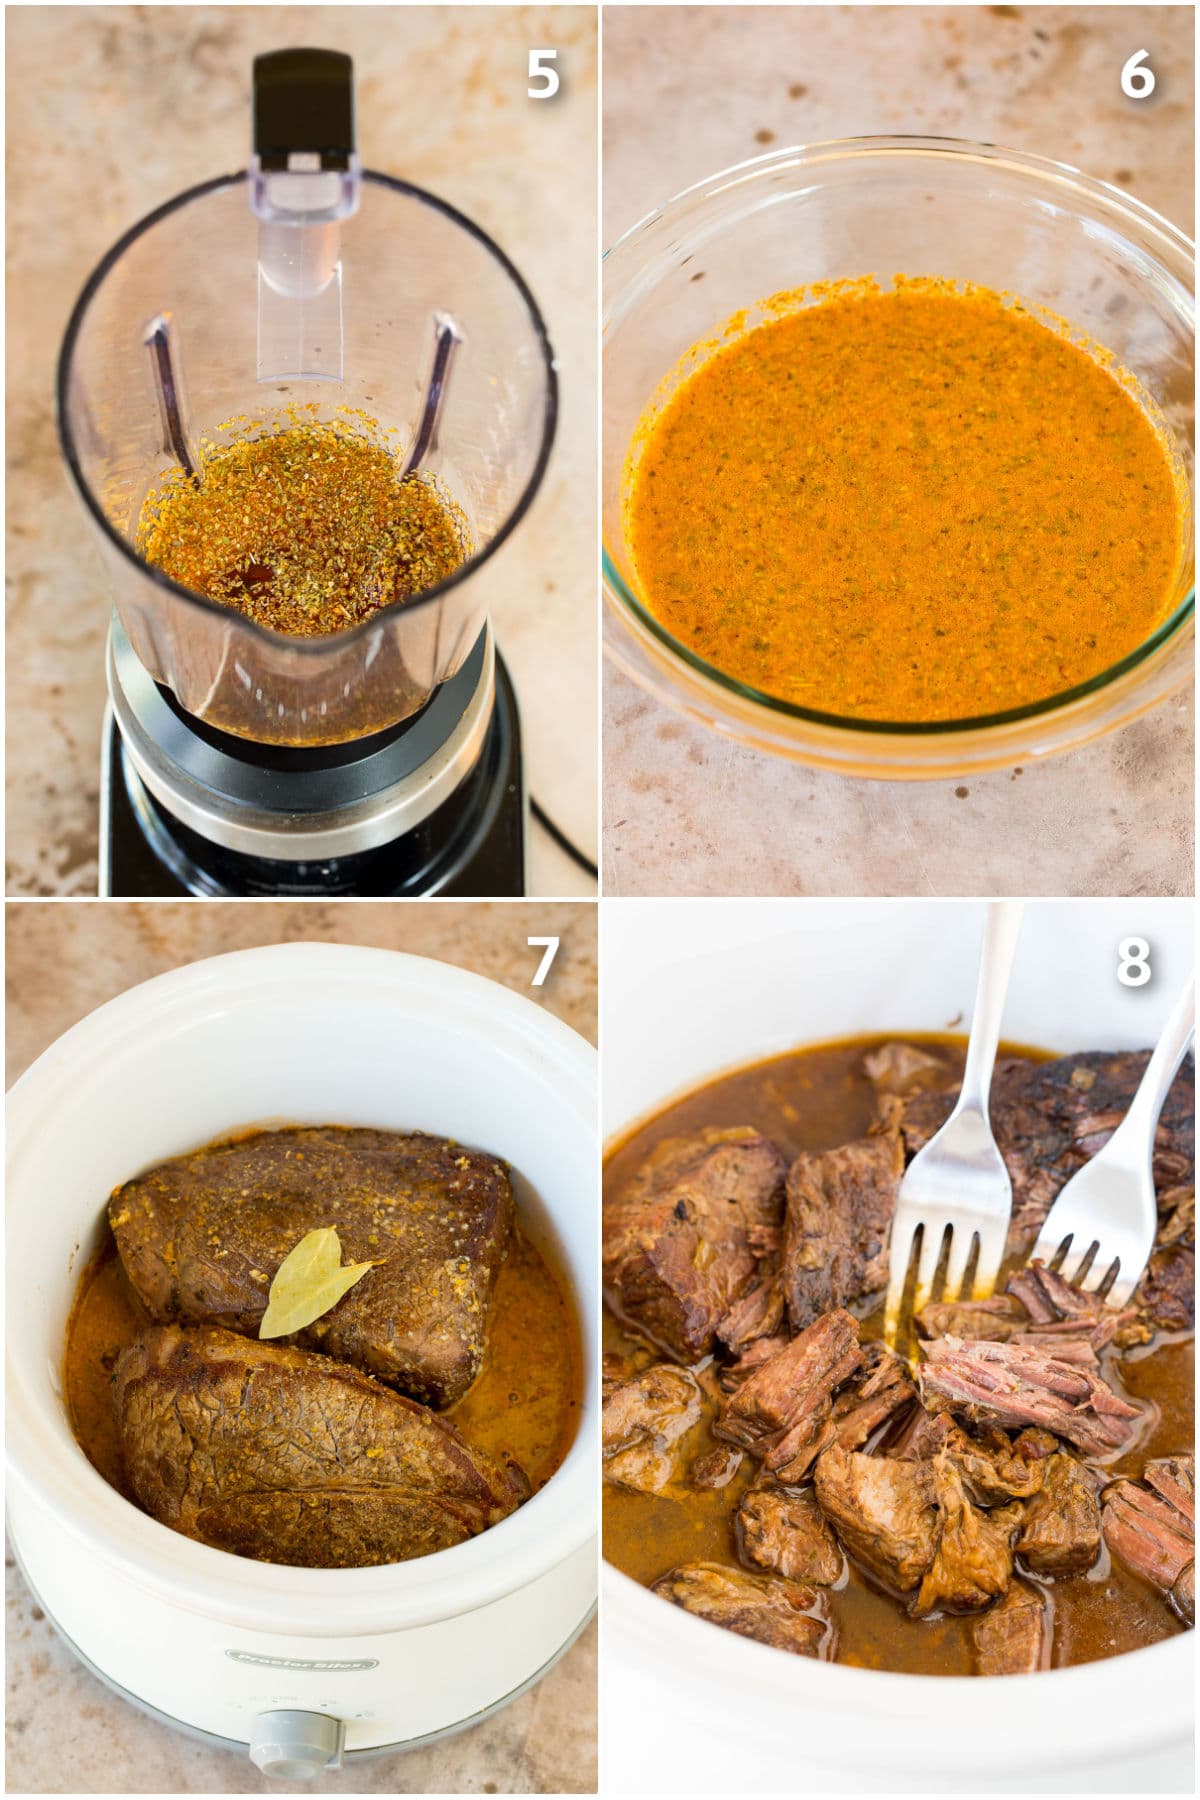 Process shots showing how to make barbacoa sauce and meat in a slow cooker.